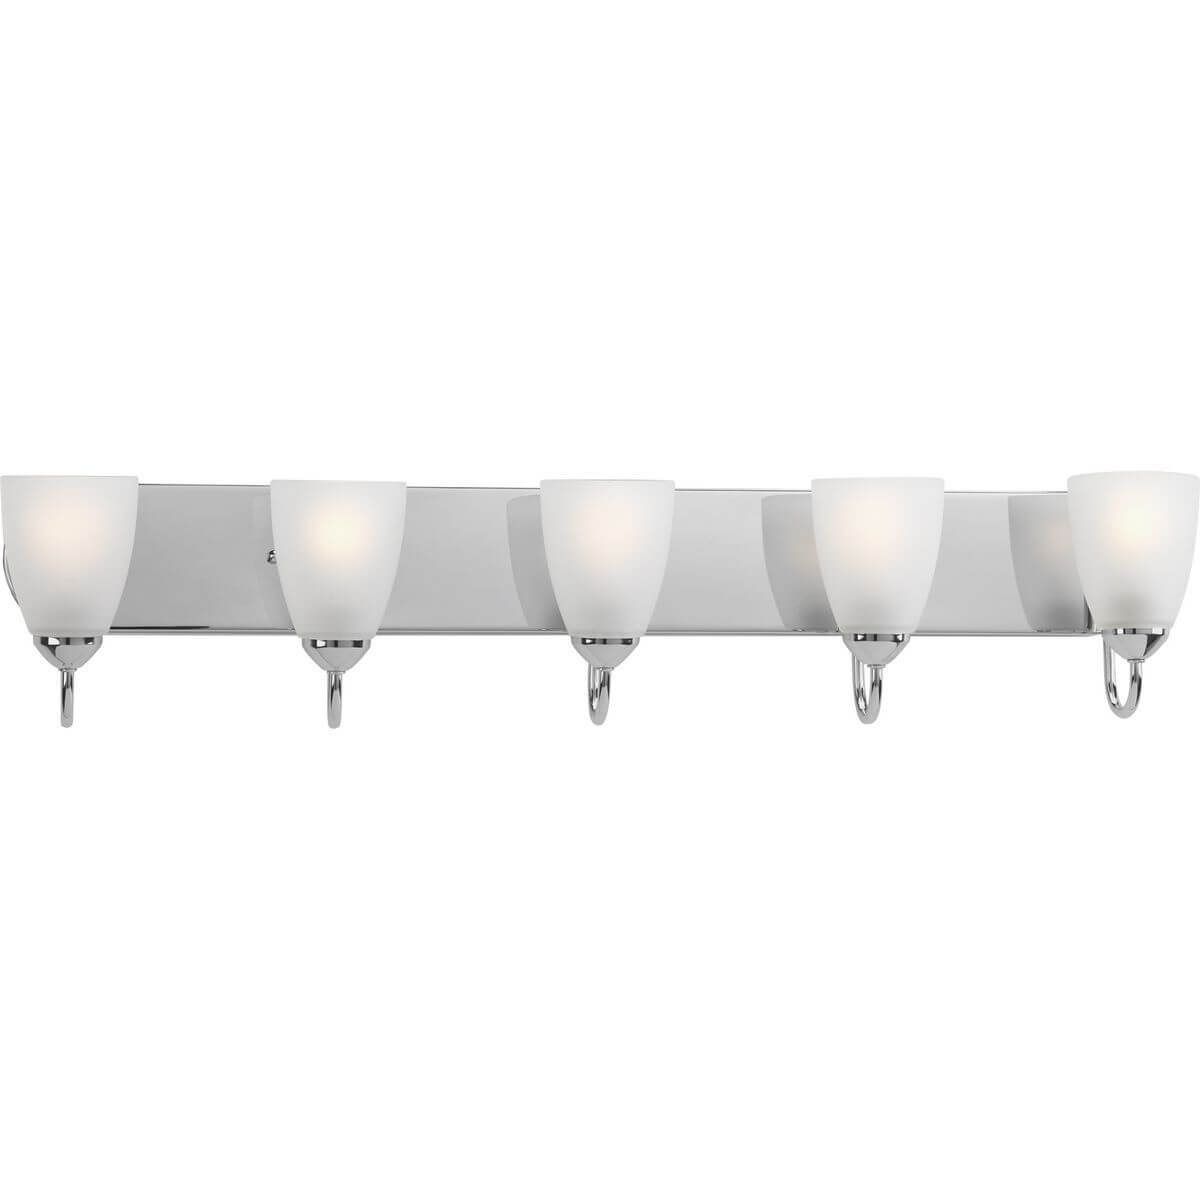 Progress Lighting Gather 5 Light 36 inch Bath Vanity Light in Polished Chrome with Etched Glass P2713-15